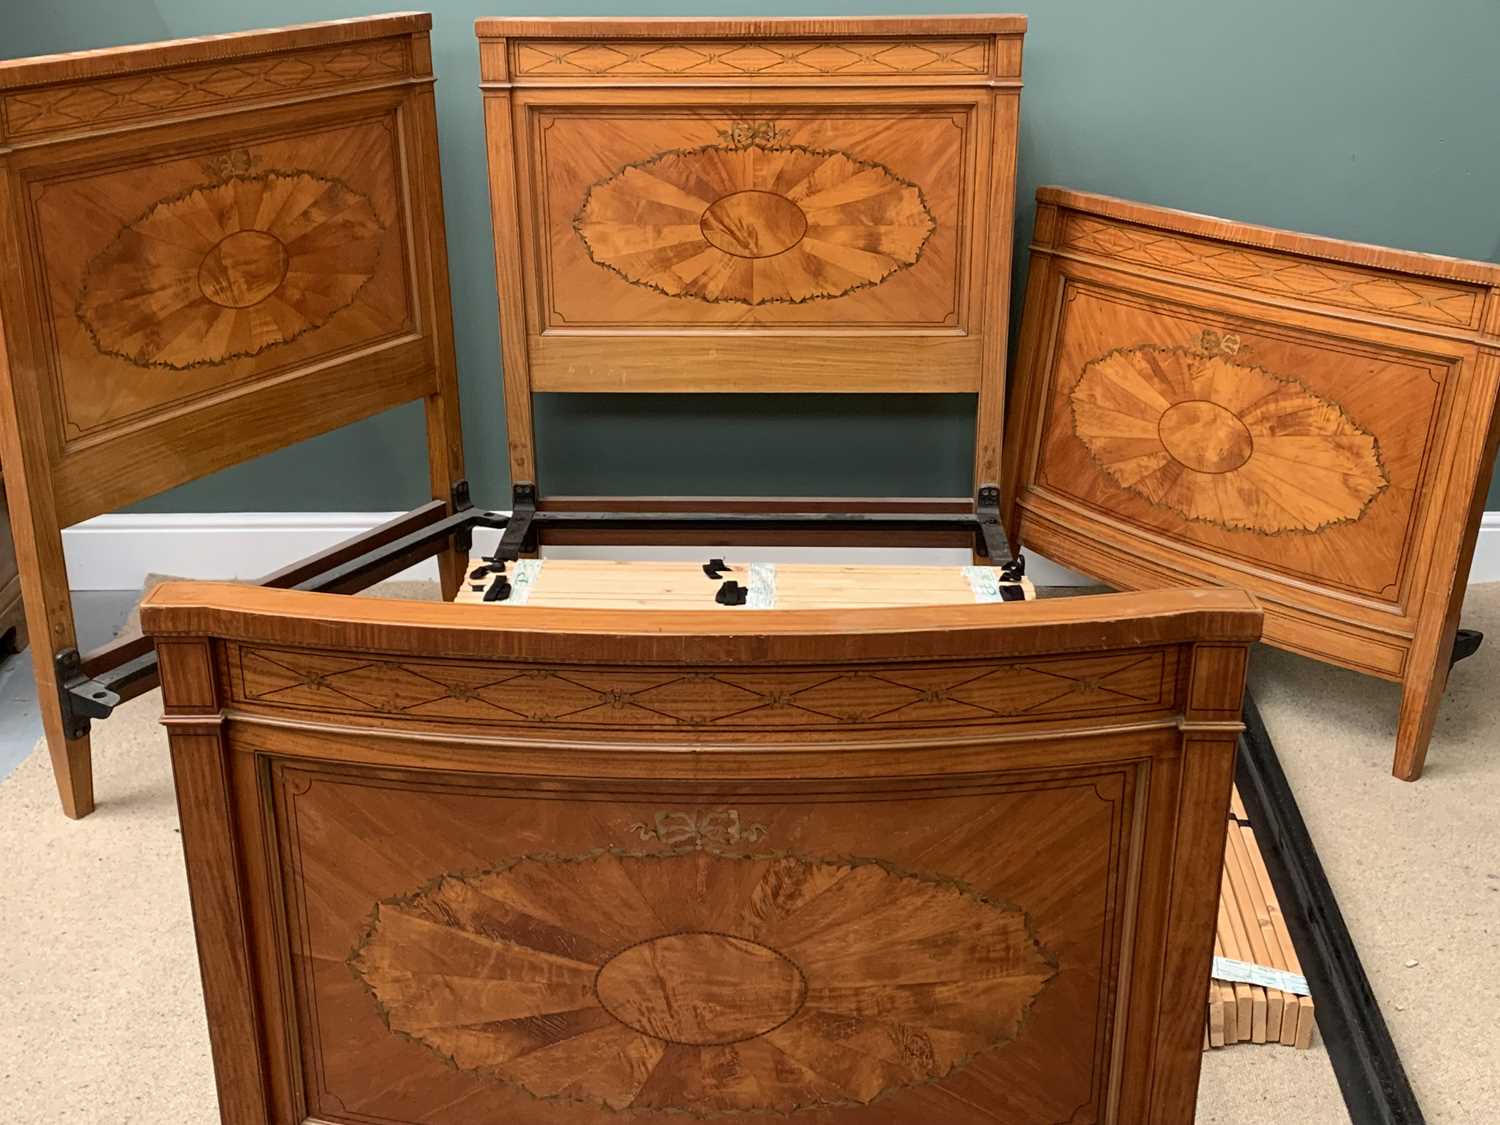 ANTIQUE MAHOGANY BEDS (2 SINGLES) - an ornate pair with intricate fan inlay (with rails and - Image 2 of 2